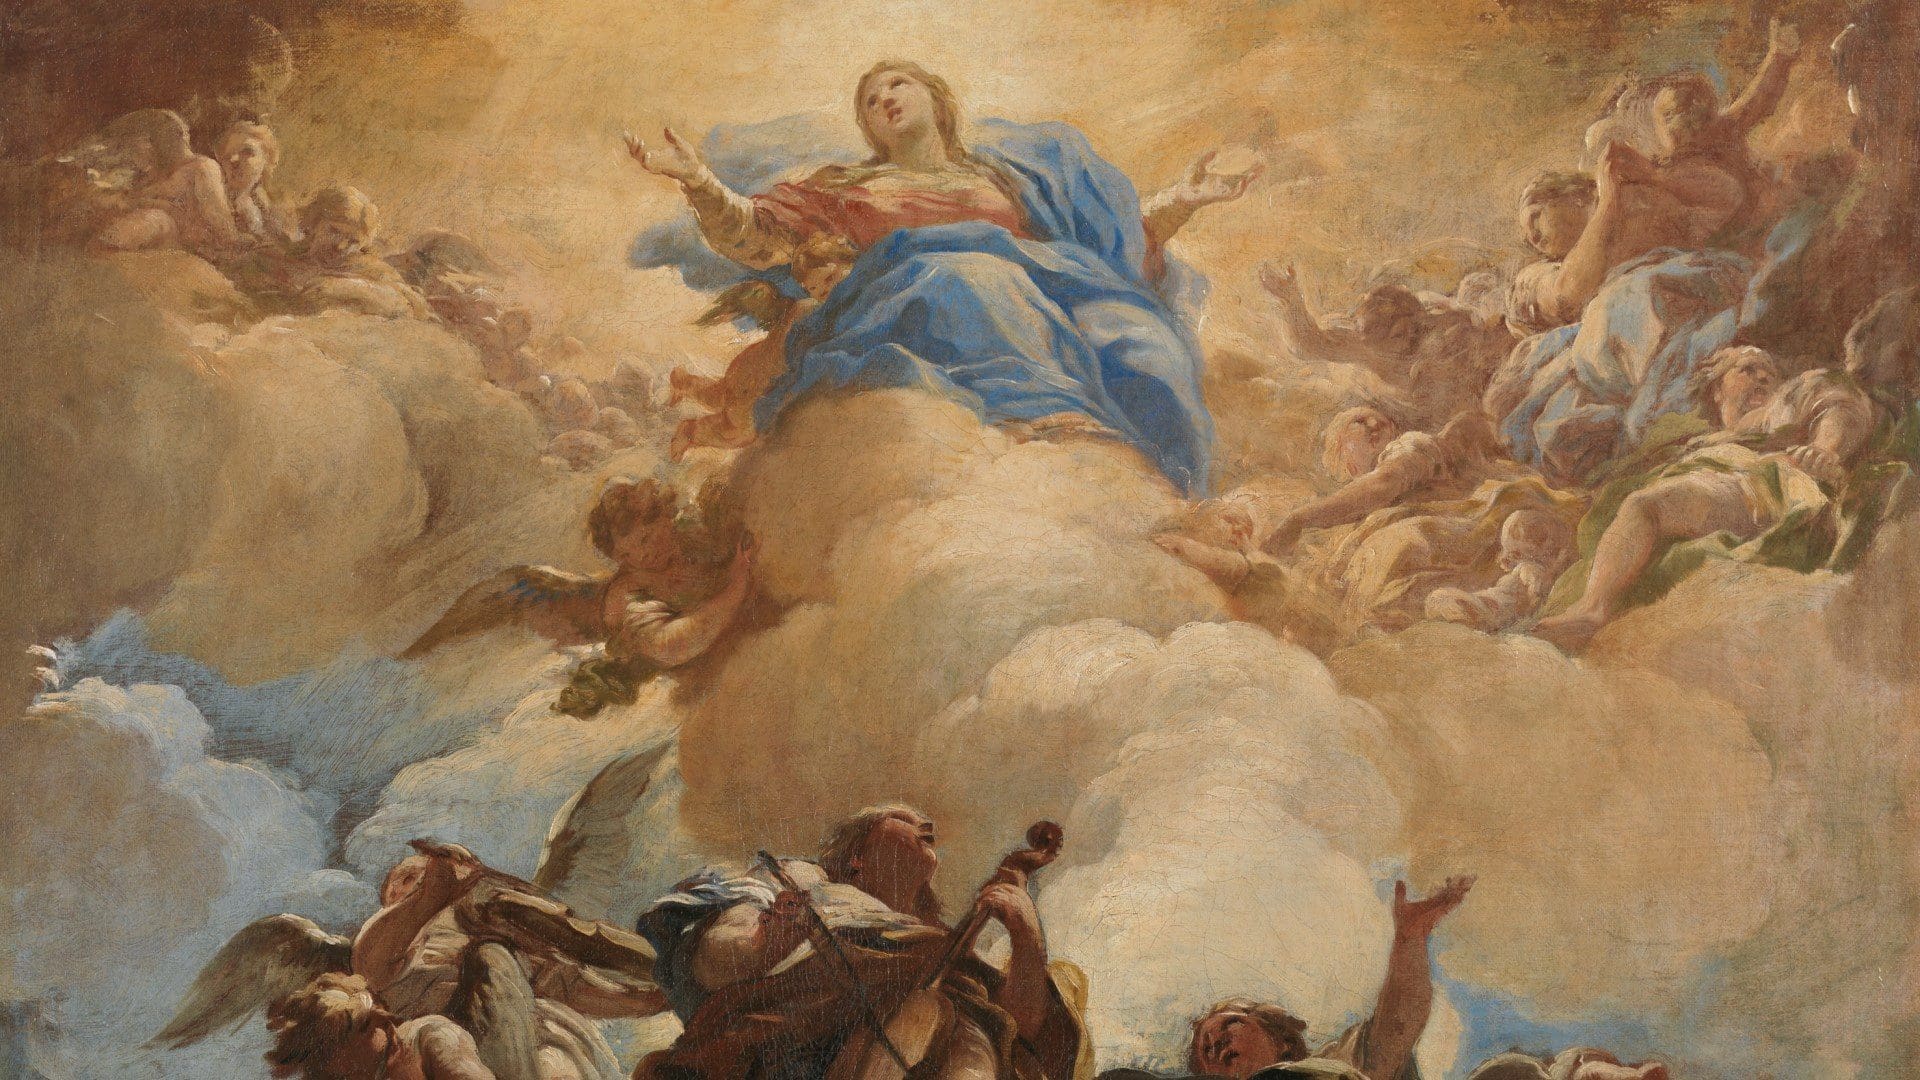 The Assumption of the Virgin by Luca Giordano (ca. 1698)